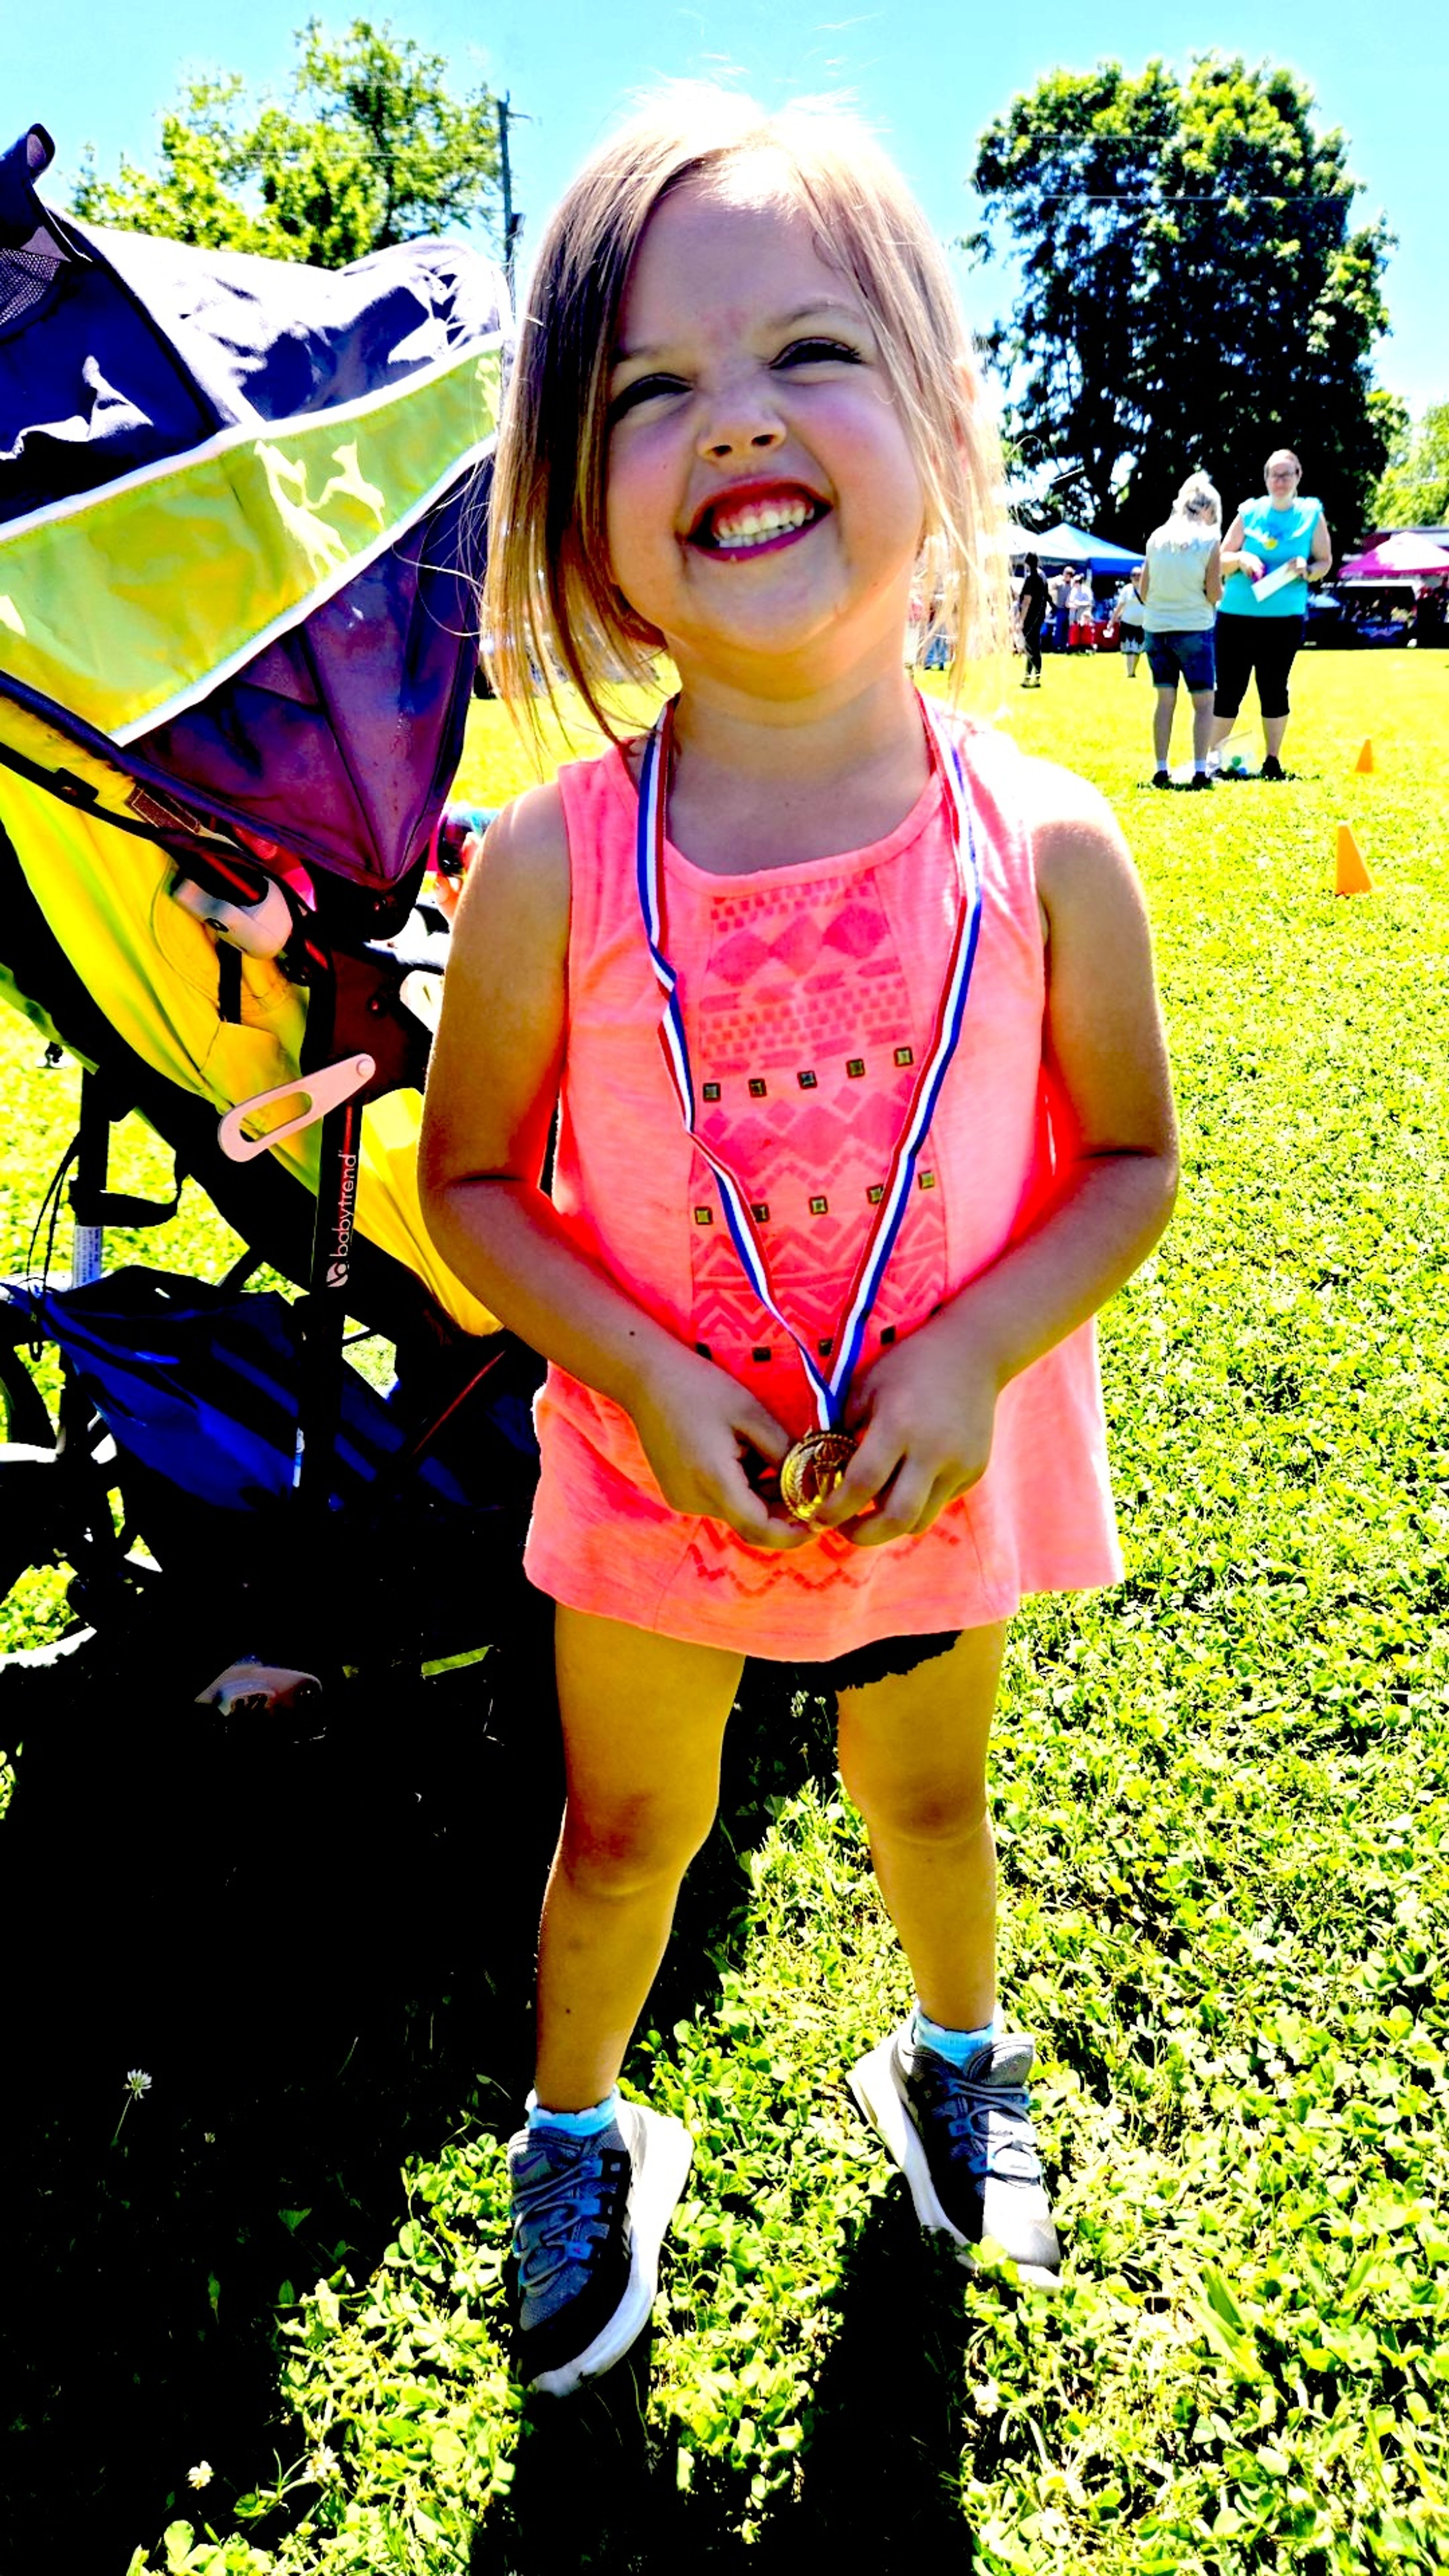 Arabella McWilliams is the first-place winner in the egg relay race for her age division (2 to 5).